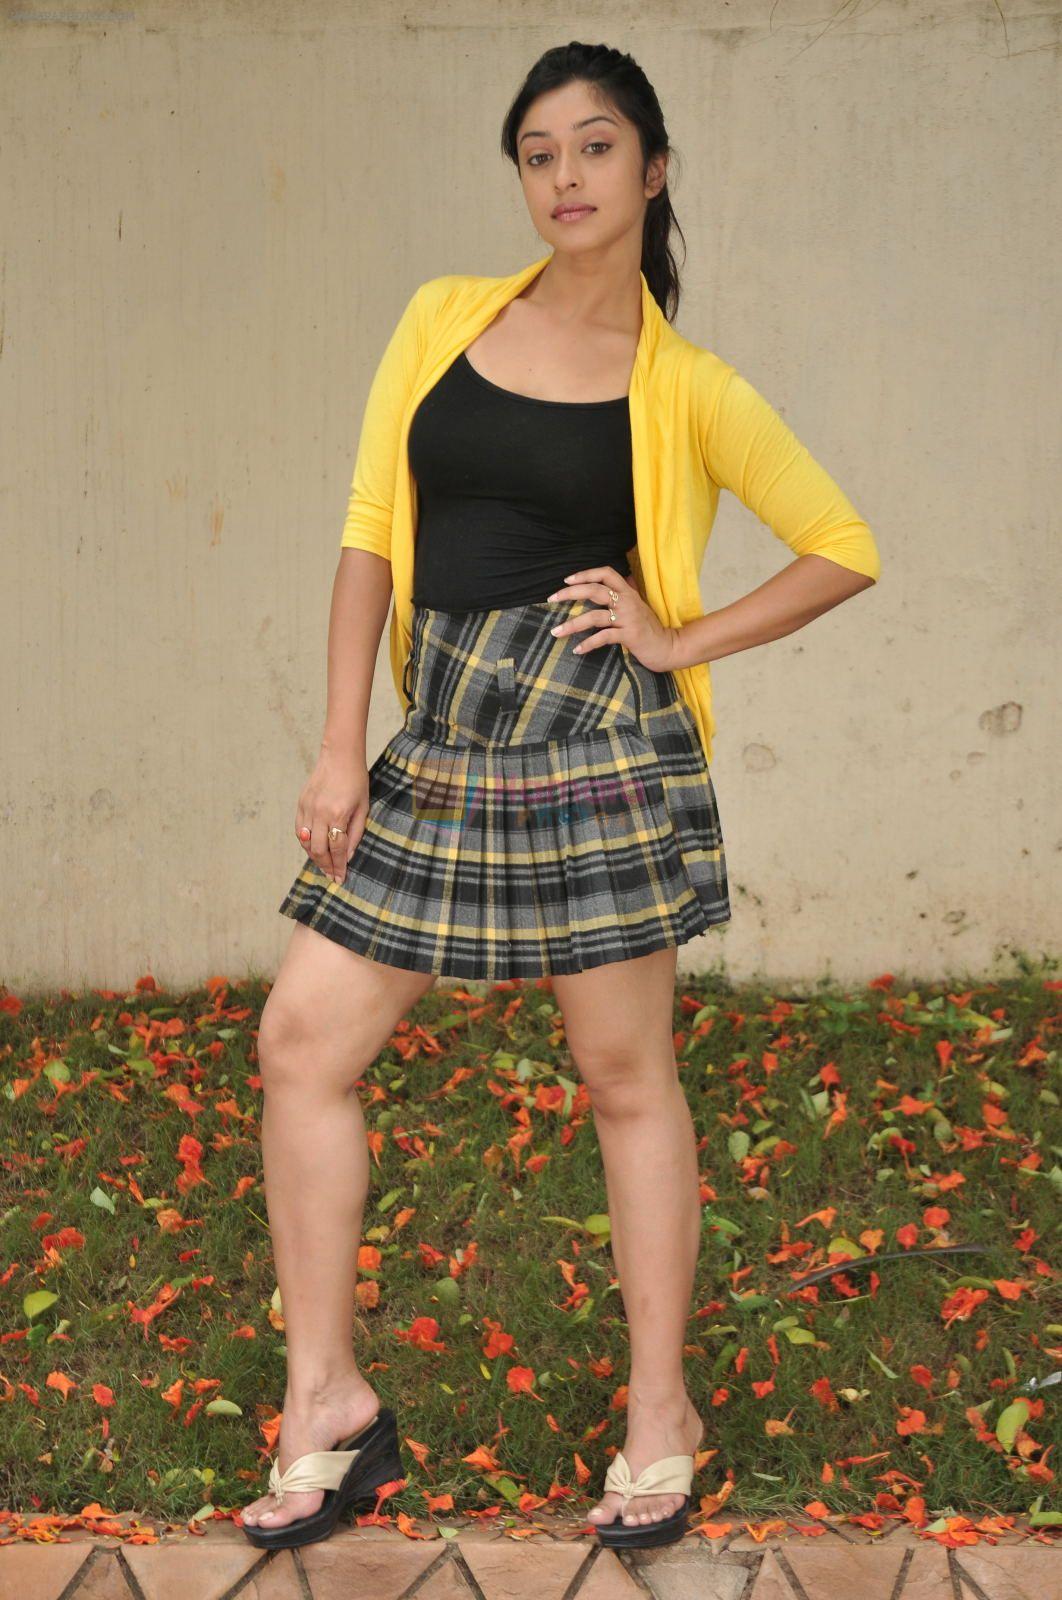 Payal Ghosh in a casual shoot on July 26, 2010